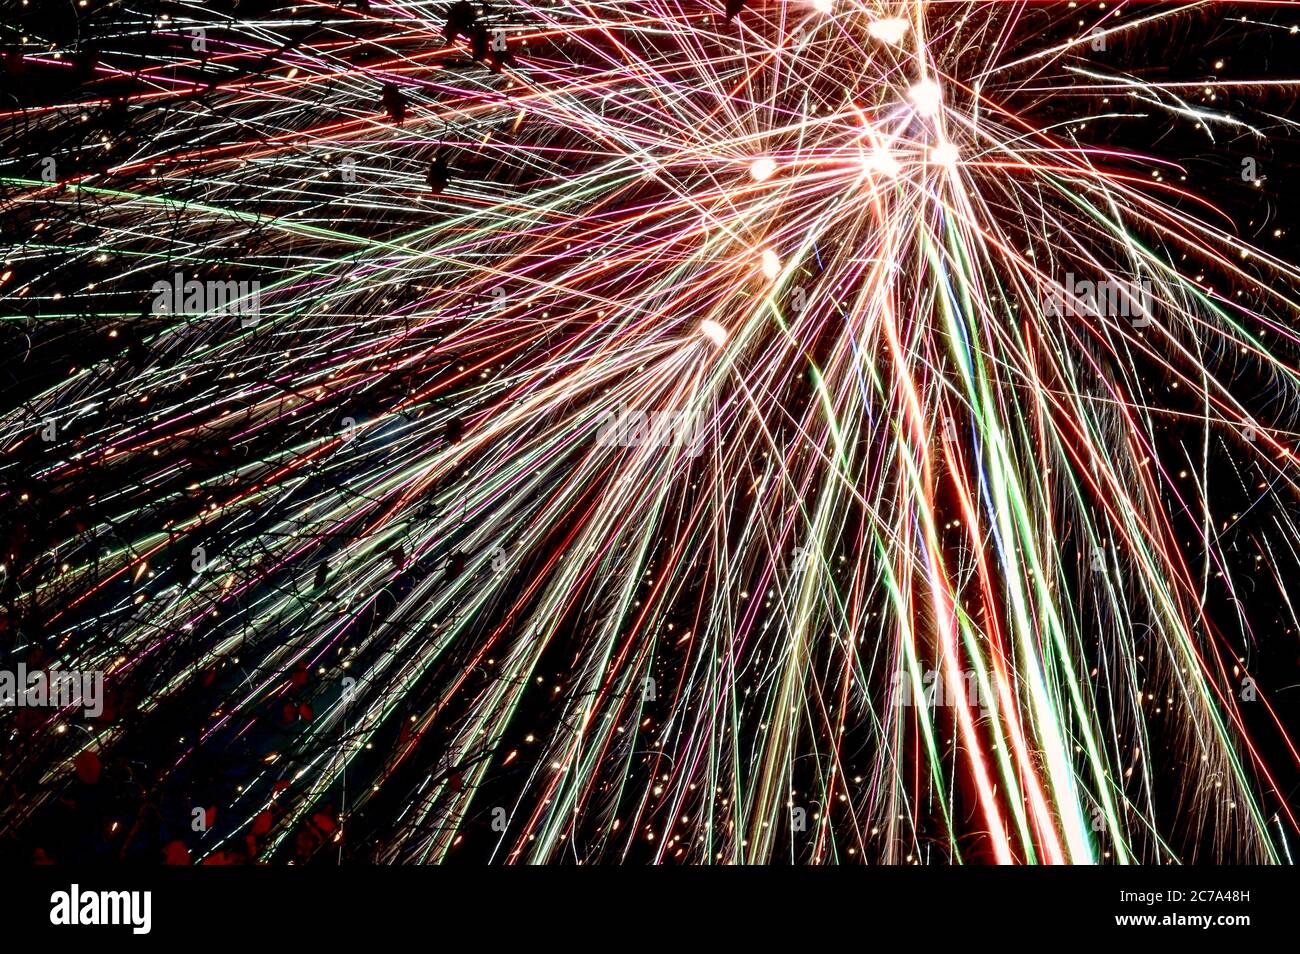 Colourful fireworks exploding in night sky long exposure light trail Stock Photo